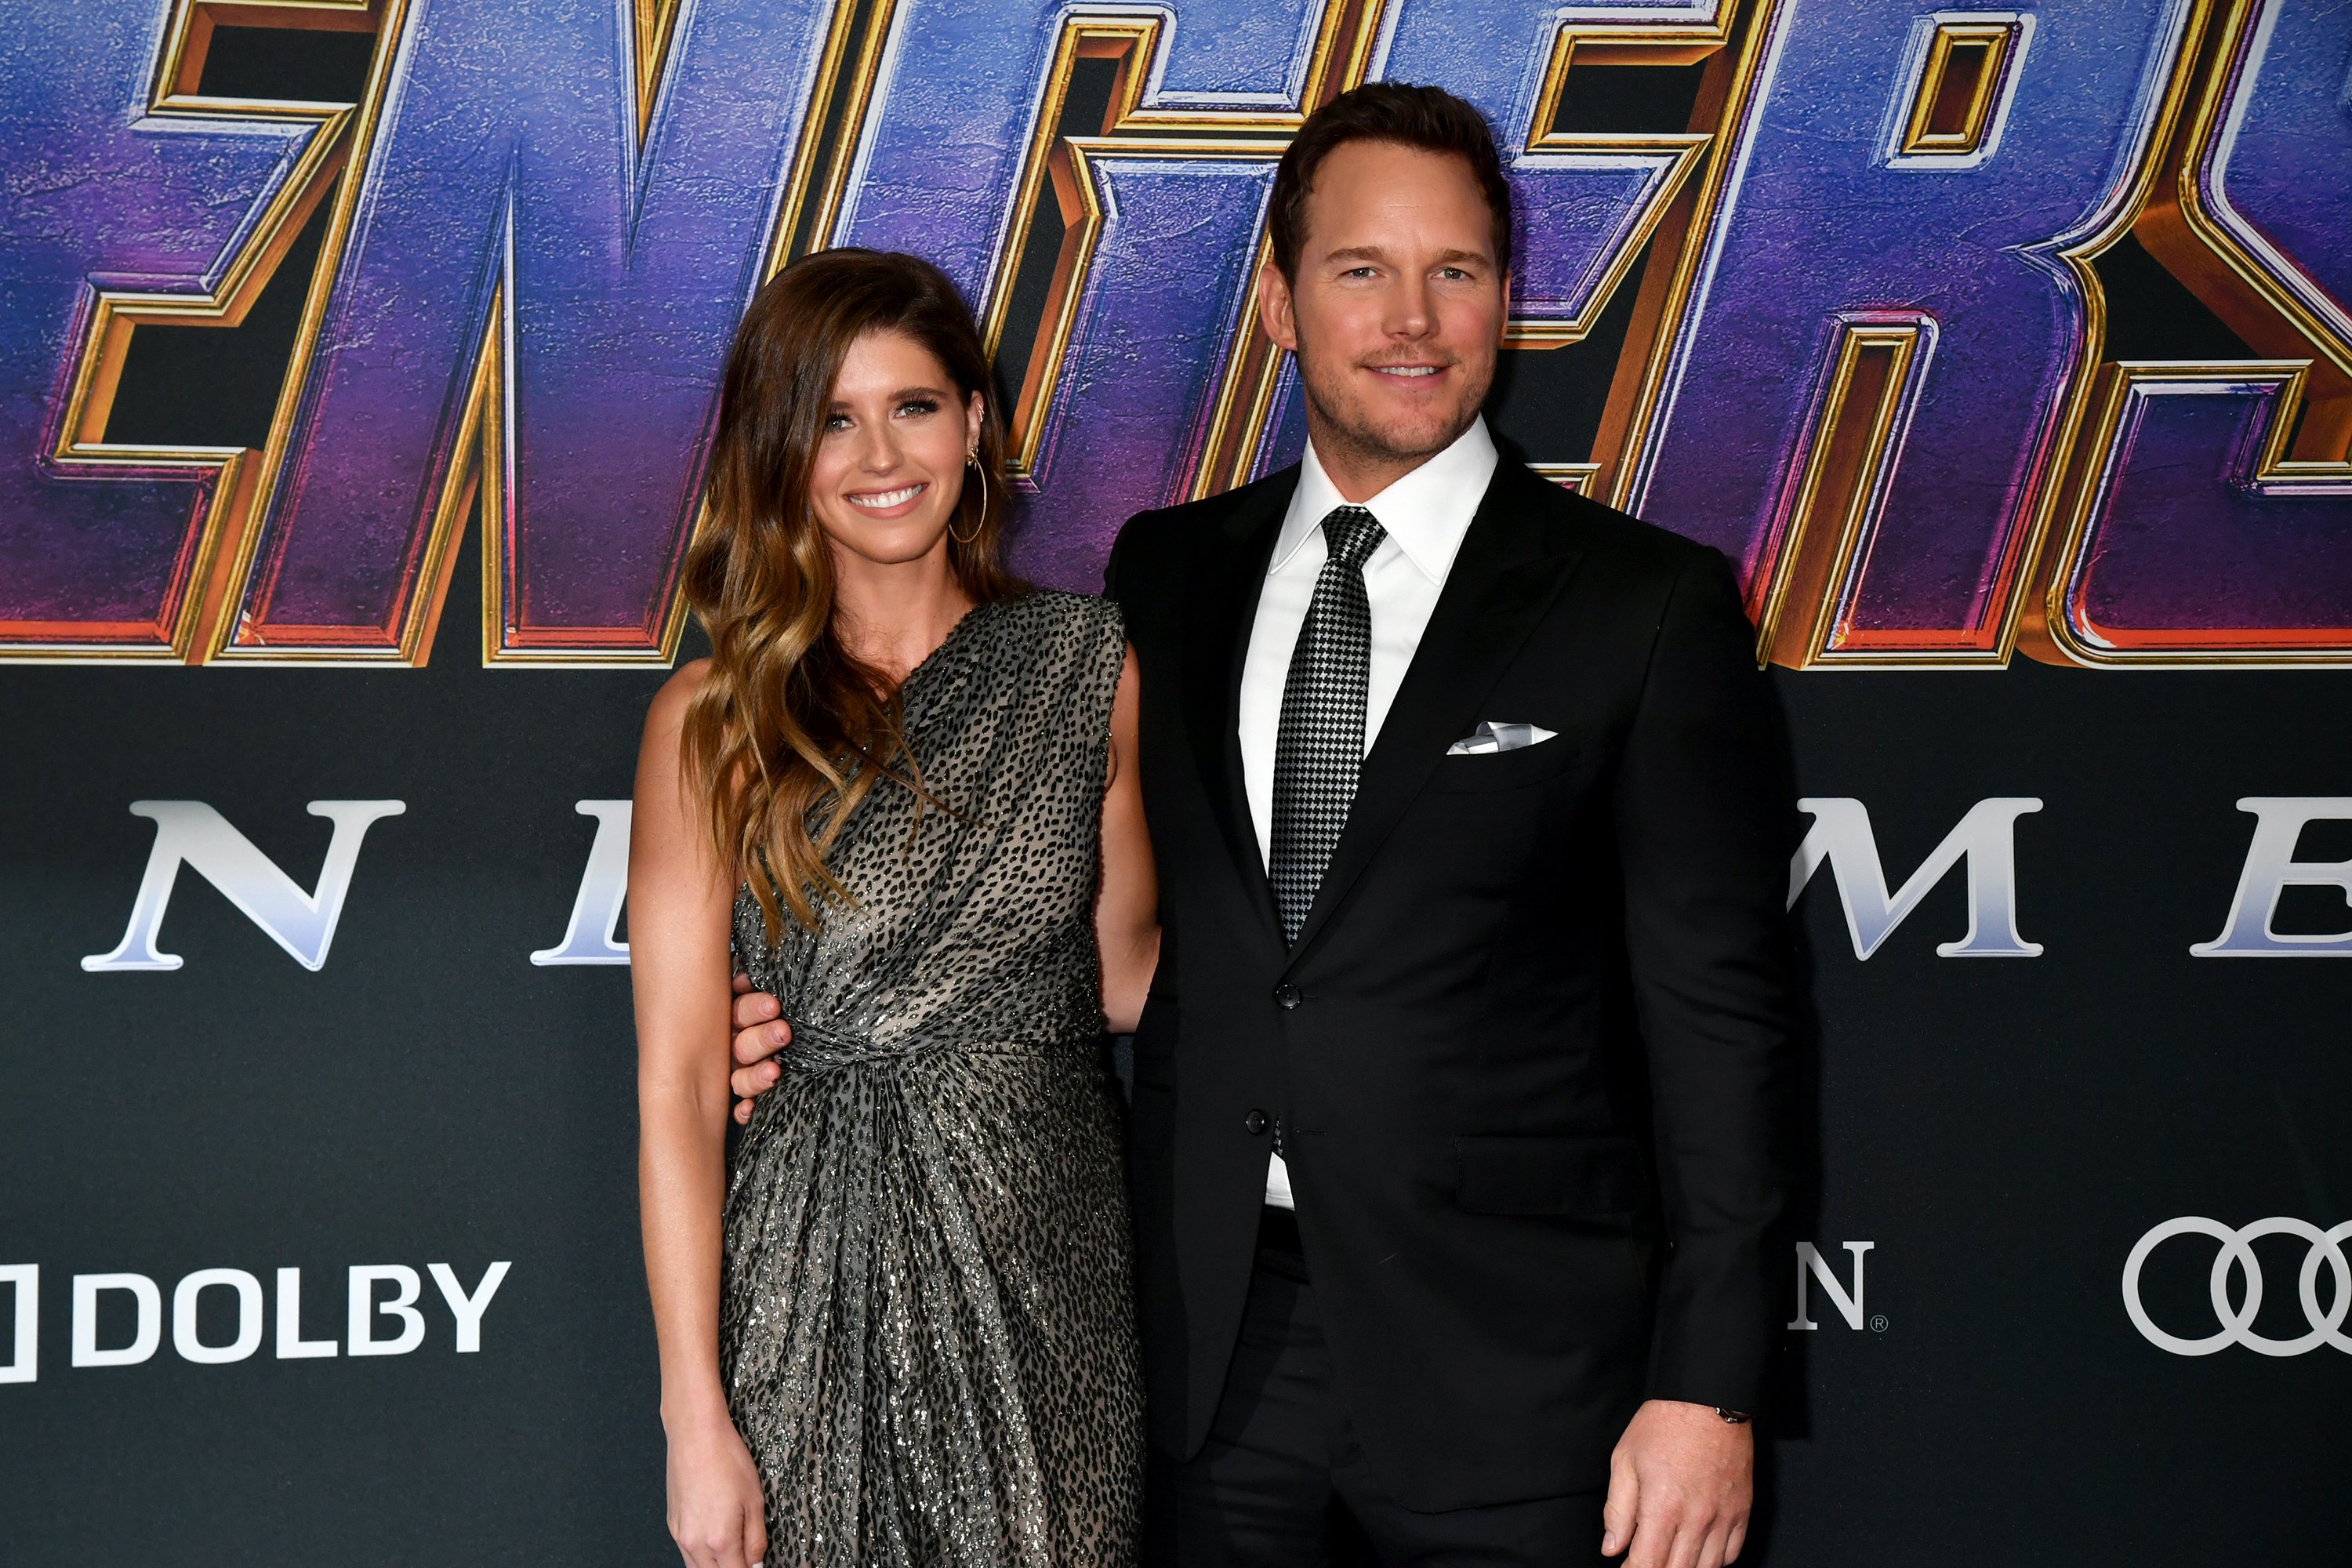 Katherine Schwarzenegger and Chris Pratt attends the World Premiere of Walt Disney Studios Motion Pictures "Avengers: Endgame" at Los Angeles Convention Center on April 22, 2019 in Los Angeles, California. | Source: Getty Images